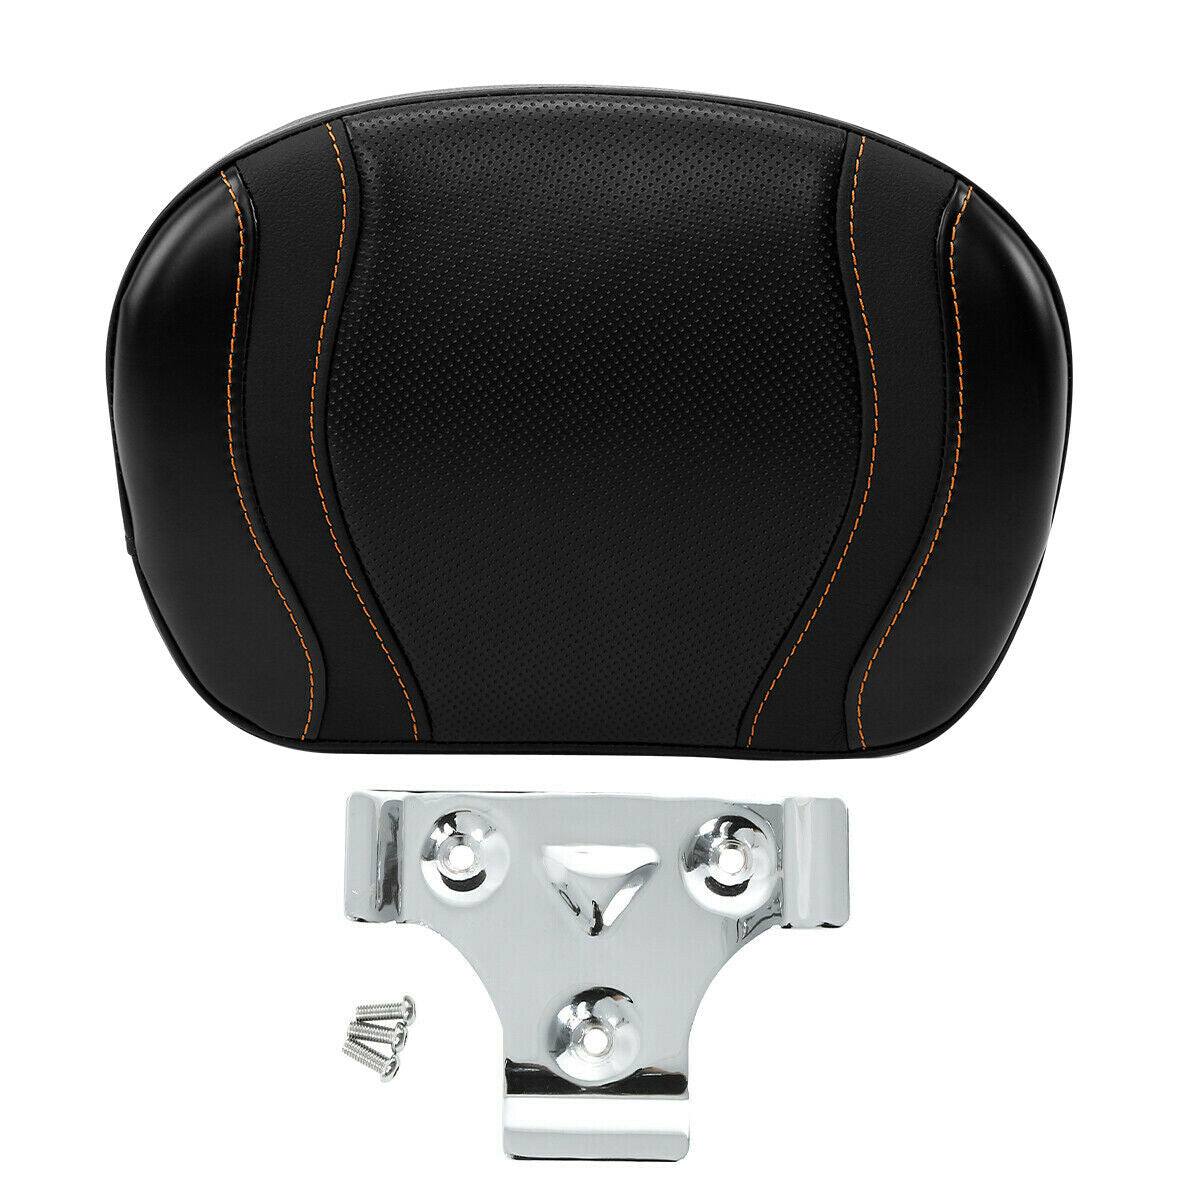 Sissy Bar Passenger Backrest Pad Fit For Harley Touring Road King Glide Softail - Moto Life Products